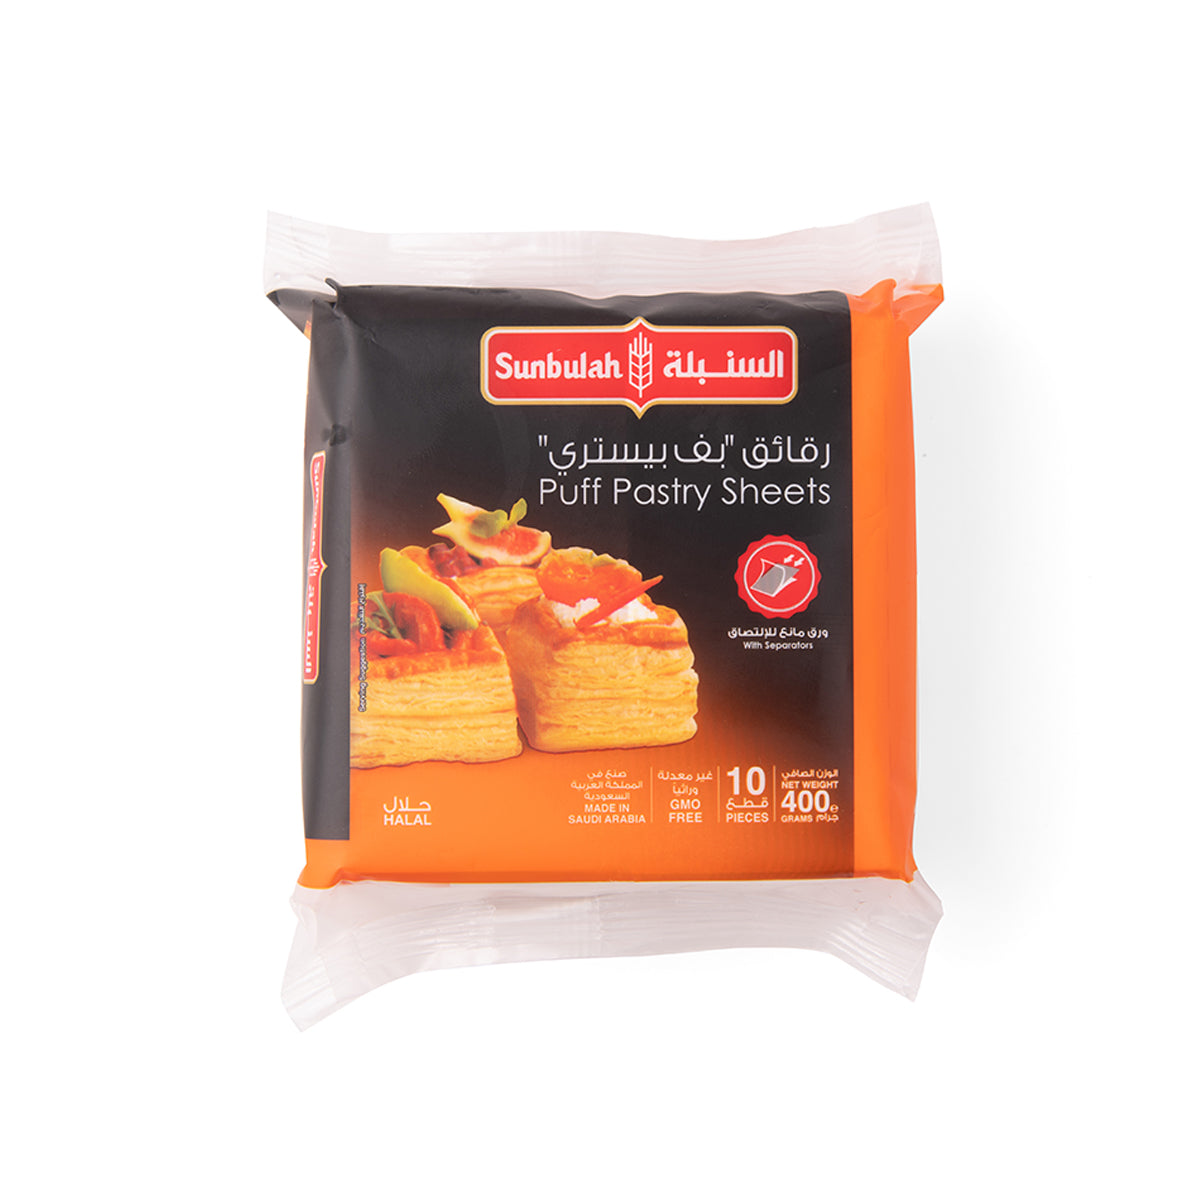 Puff Pastry Sheets 400g